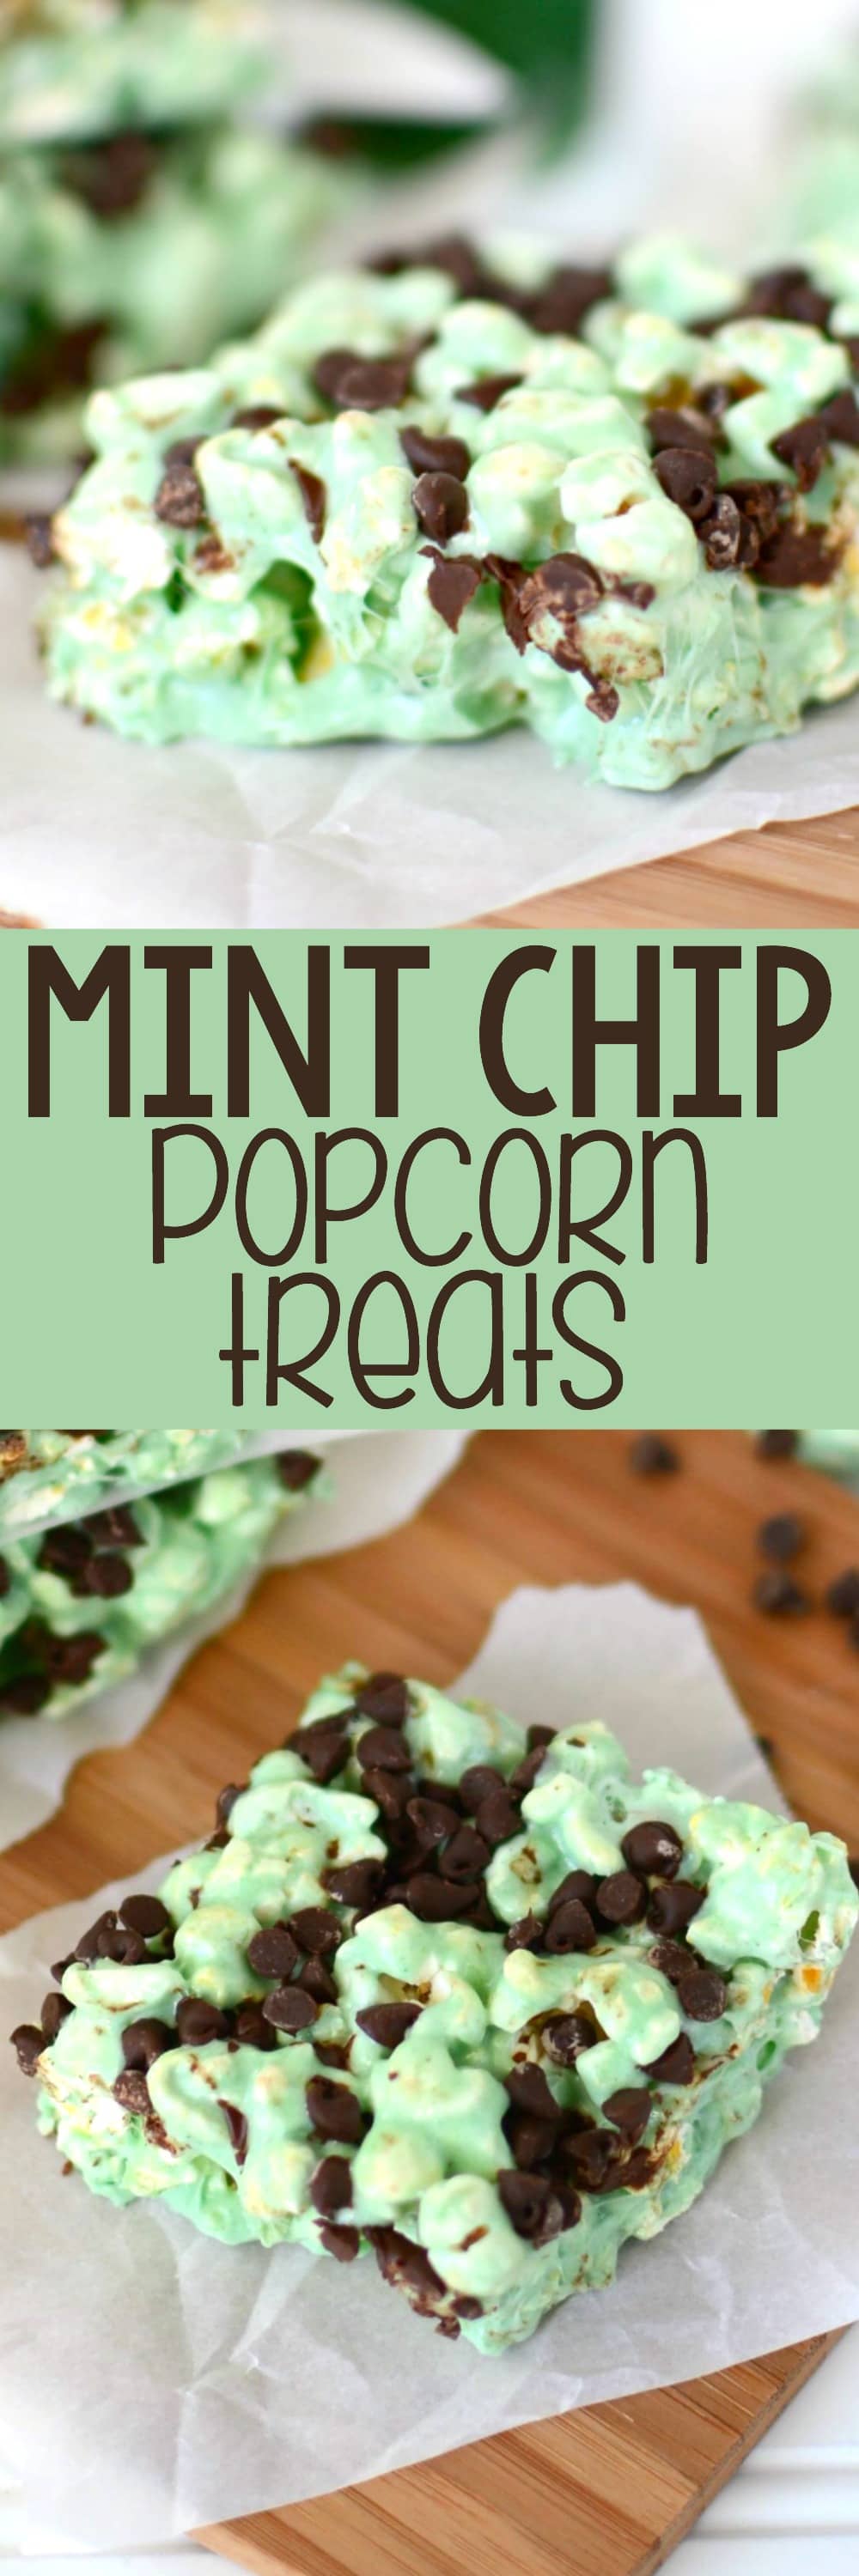 mint chocolate popcorn treats on parchment on cutting board collage photos